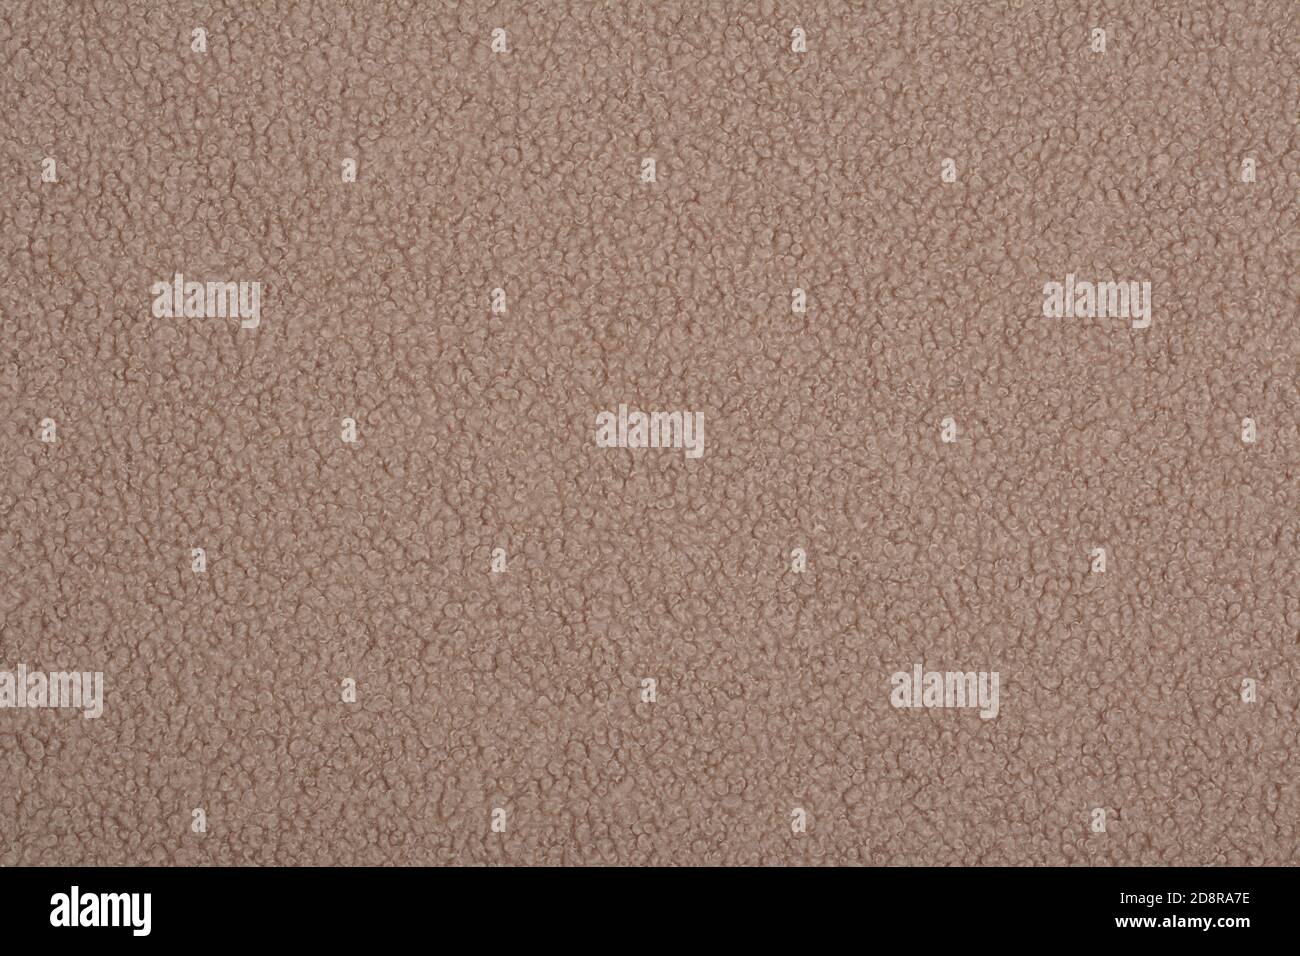 Abstract Artificial texture fur fabric, background, closeup. Fluffy material backdrop, kids toys faux fur. Stock Photo